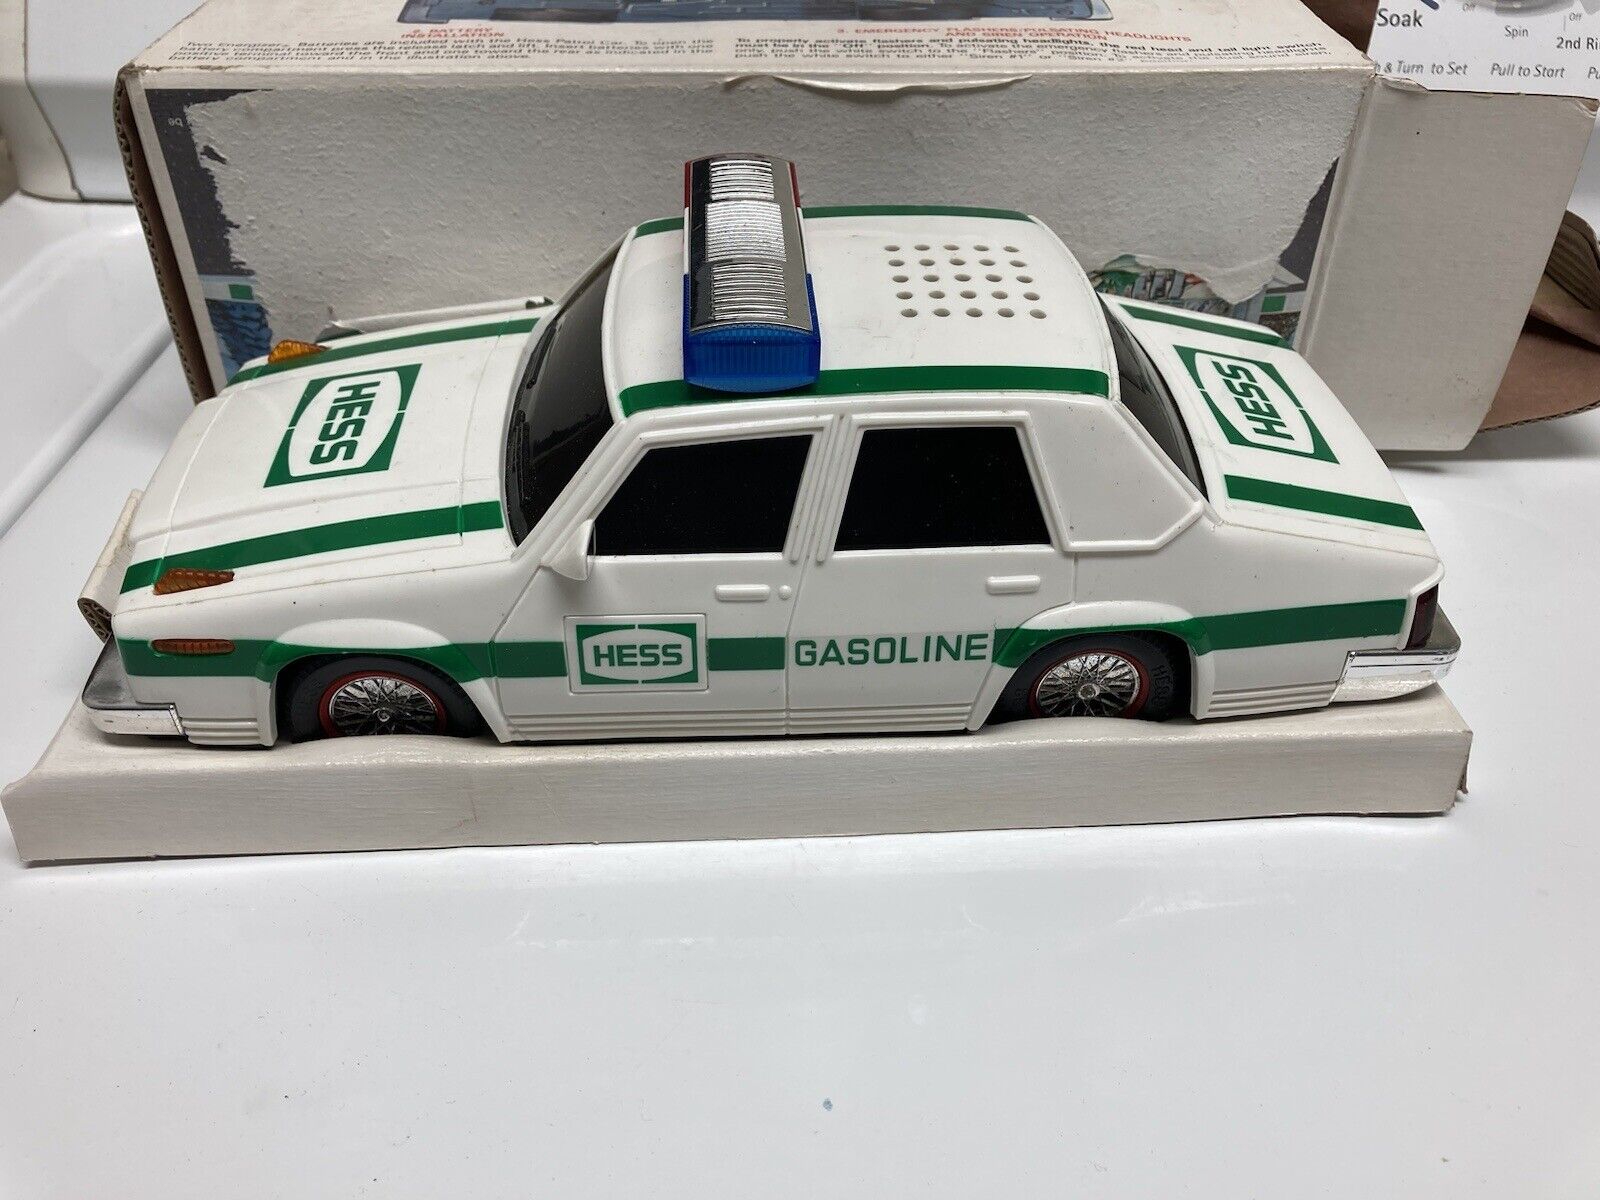 Hess 1993 Toy Truck Patrol Car New in box The Box Has Damage/paper.